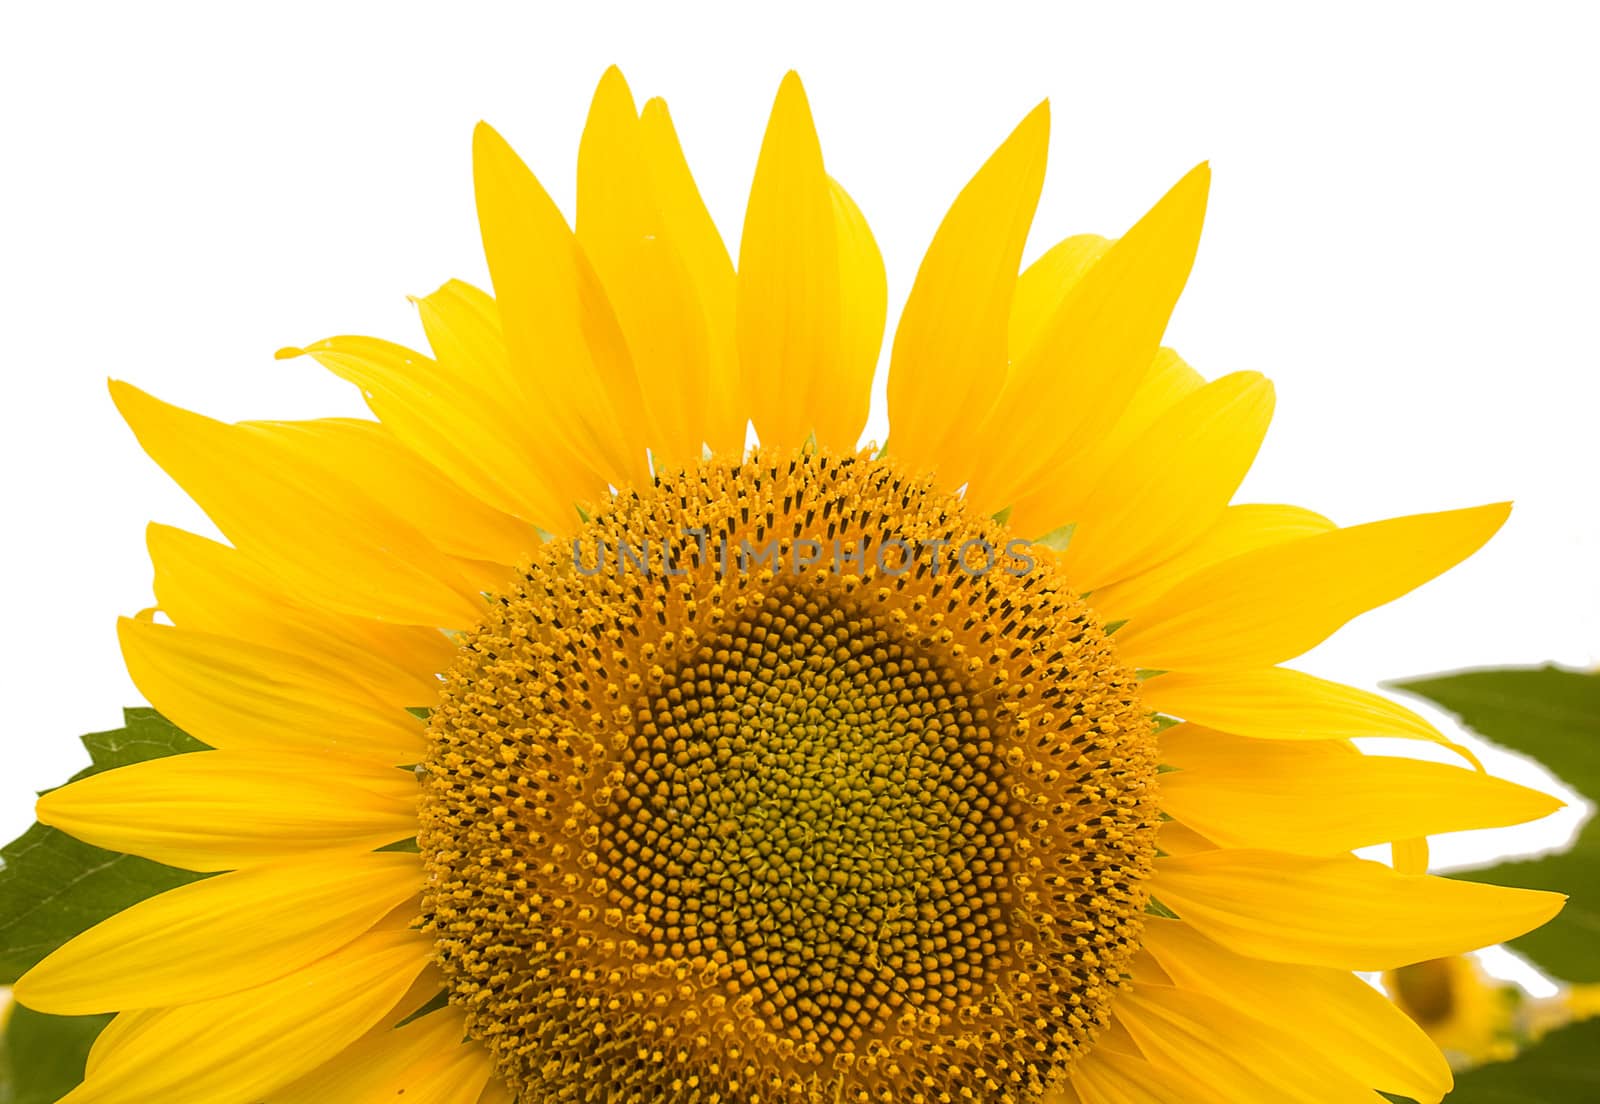 	Sunflowers on the white background